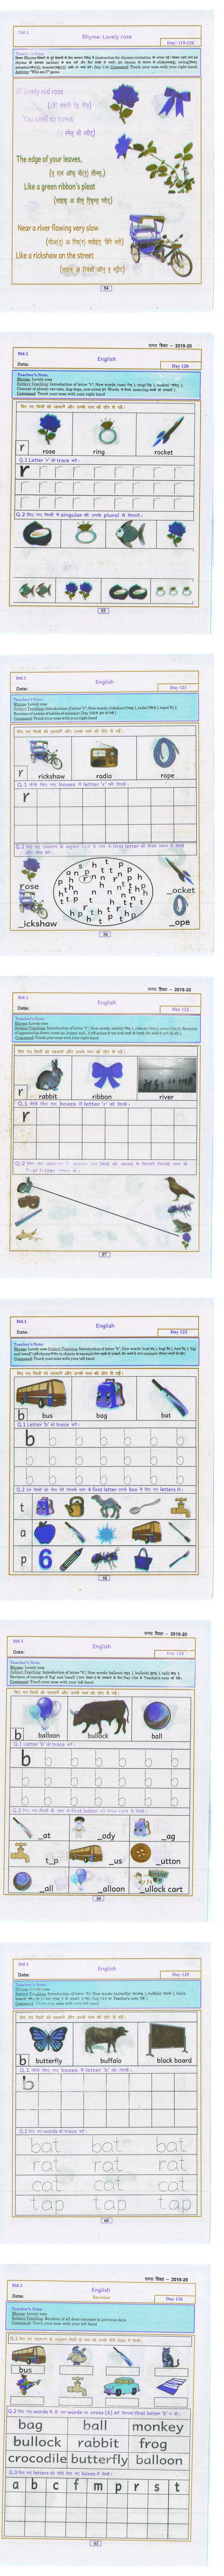 Bihar Board Class 1 English Chapter 21 Picture gallery